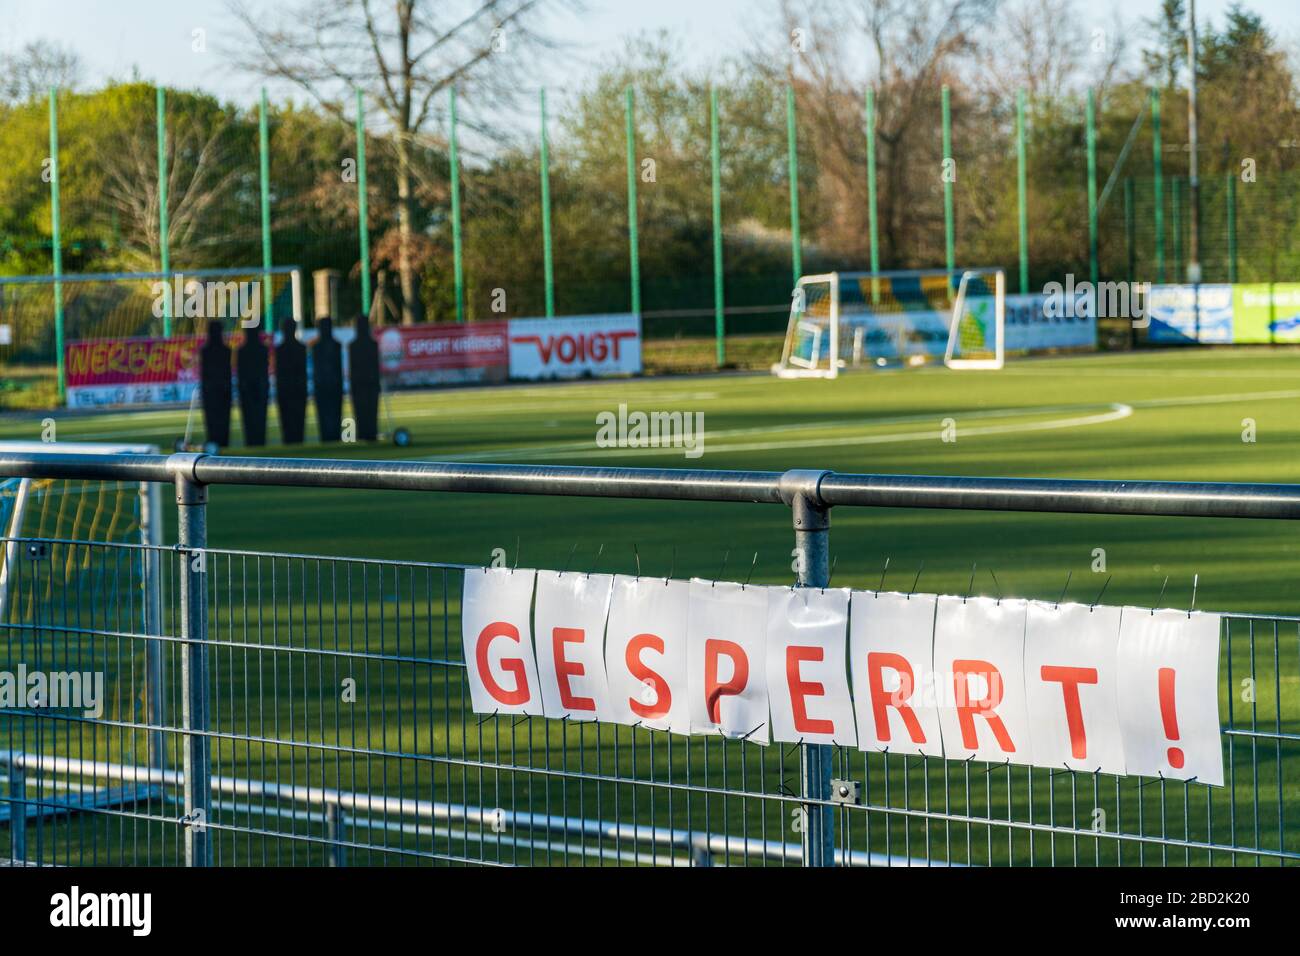 Bornheim, North Rhine-Westphalia, Germany - April 4, 2020: Soccer field closed due to corona virus, covid-19 pandemic. Sign with German lettering Stock Photo